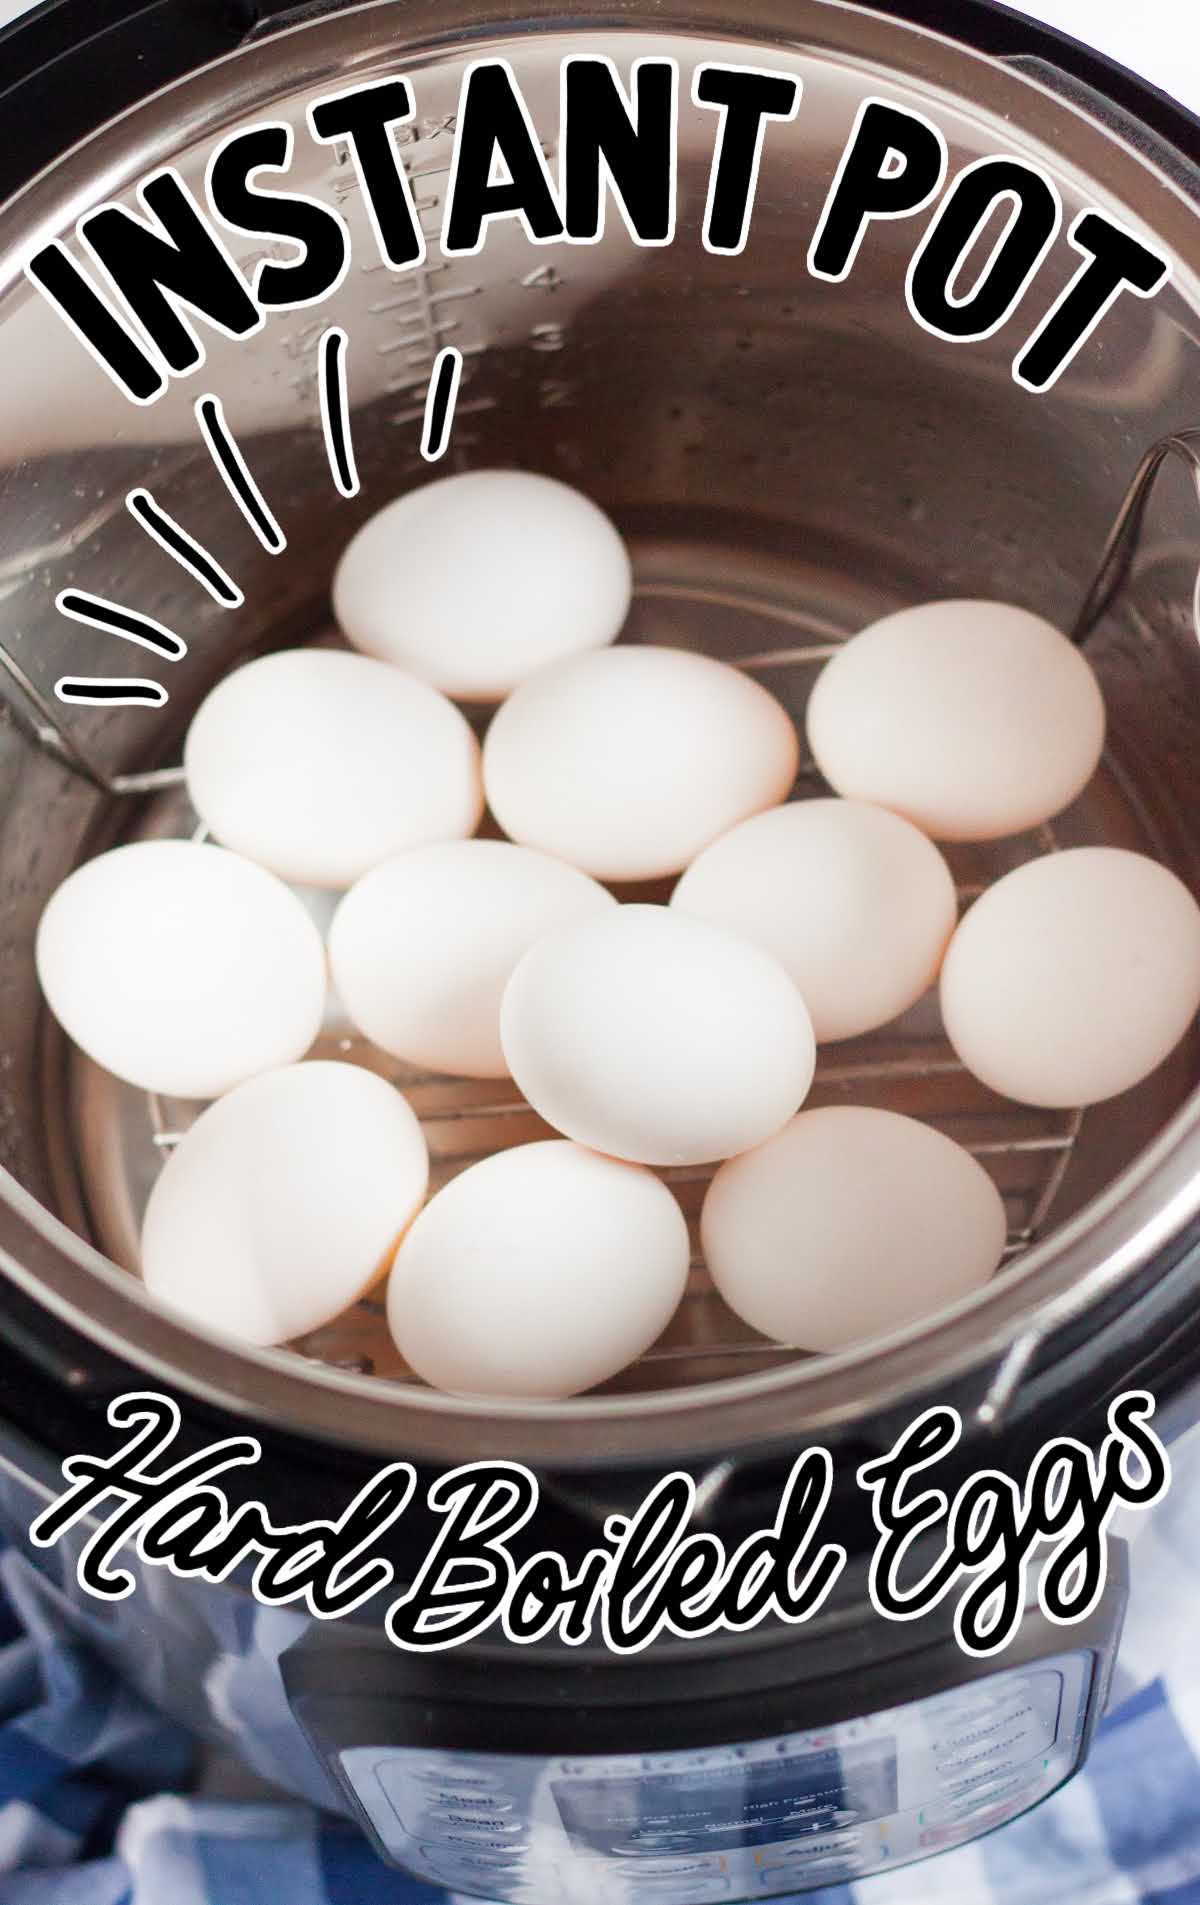 close up shot of a instant shot full of Instant Pot Hard Boiled Eggs